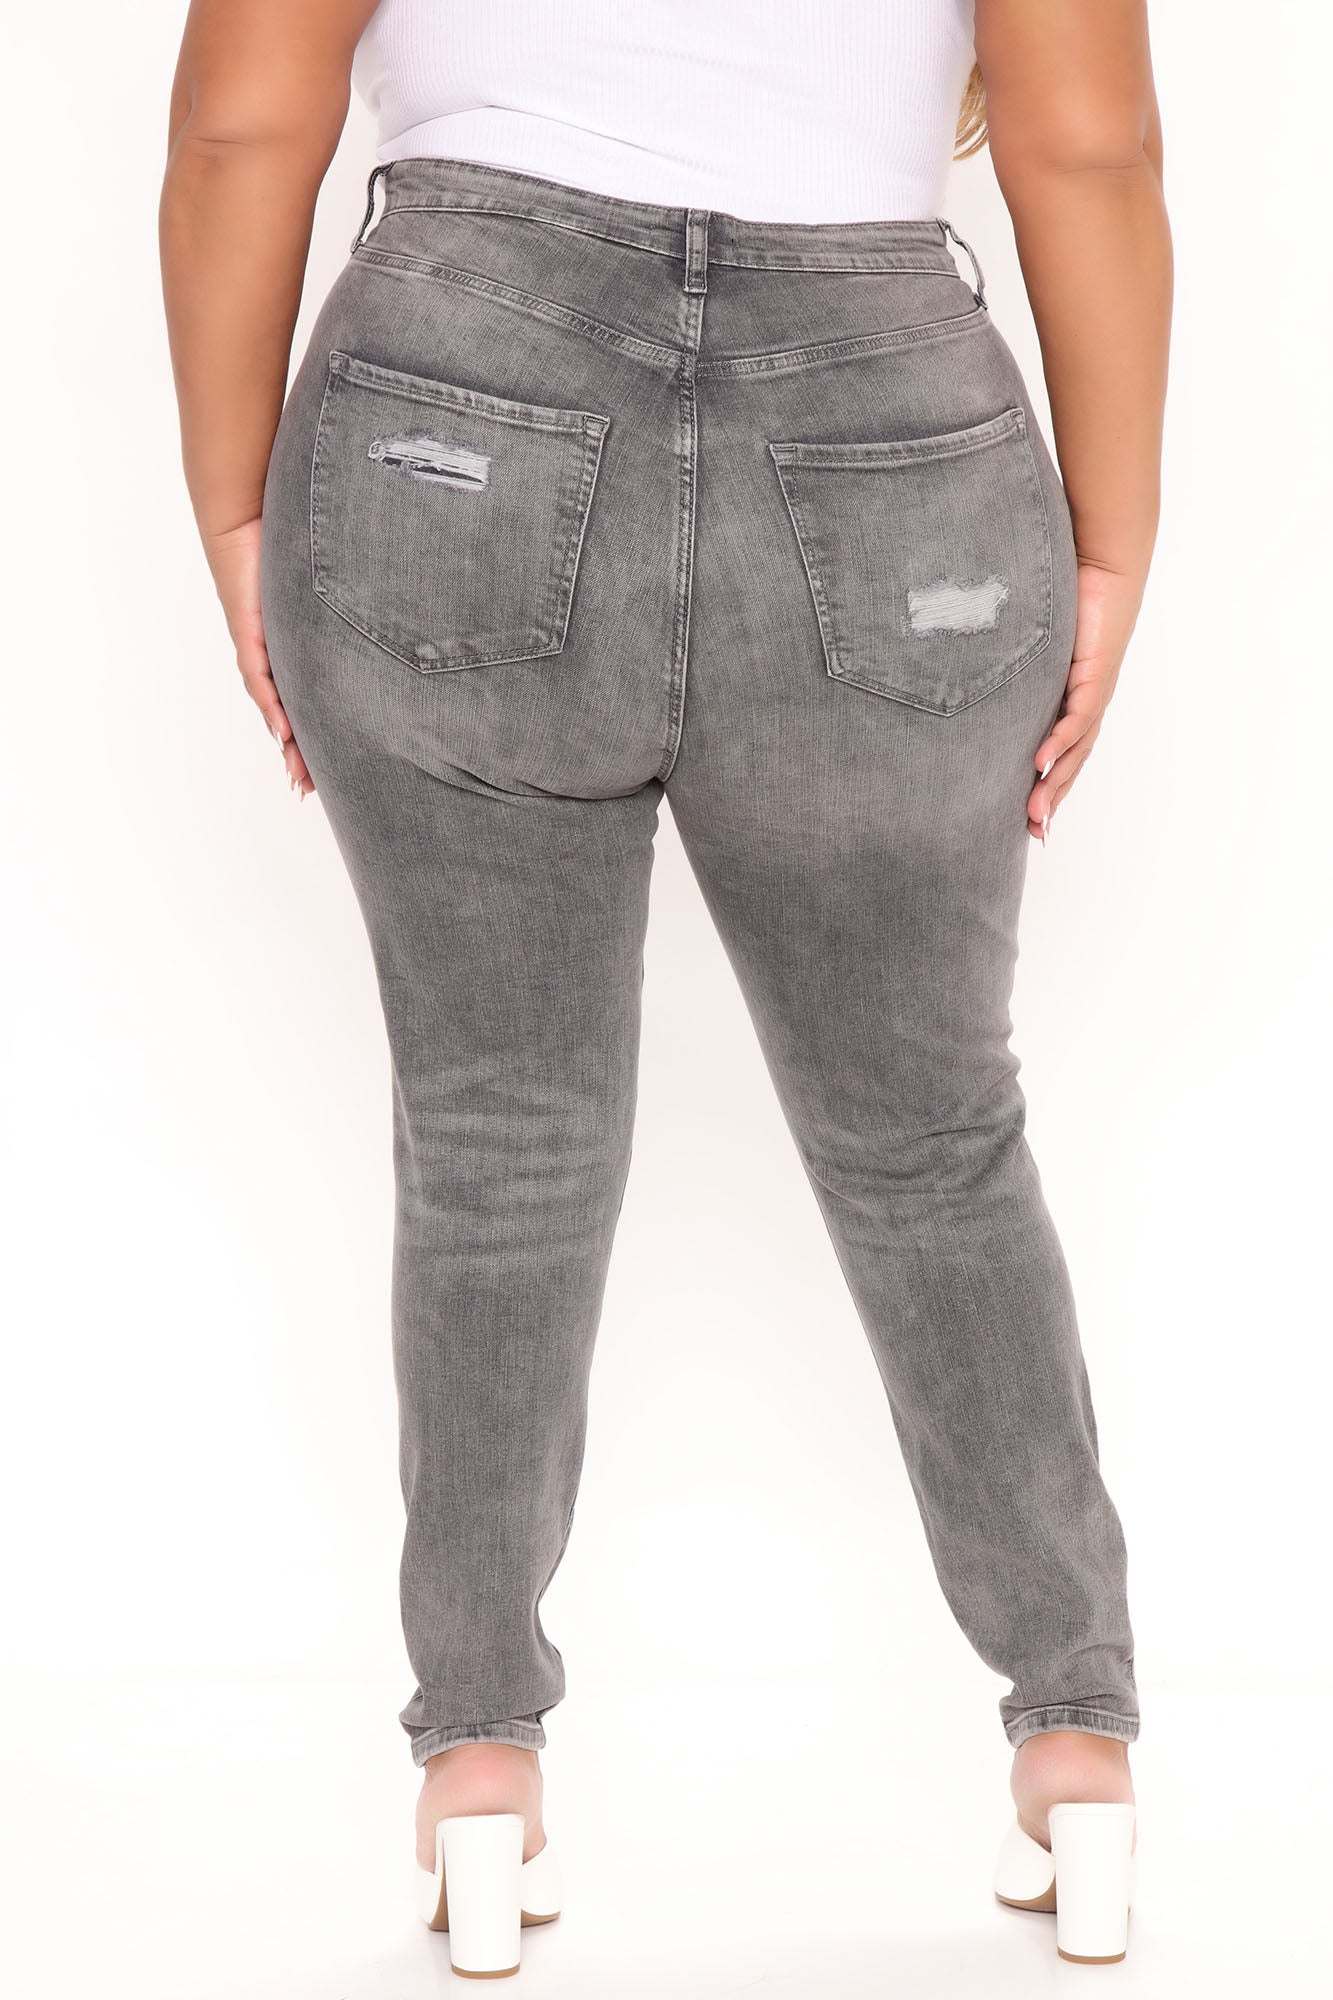 Never The Same Ripped High Rise Skinny Jeans - Grey